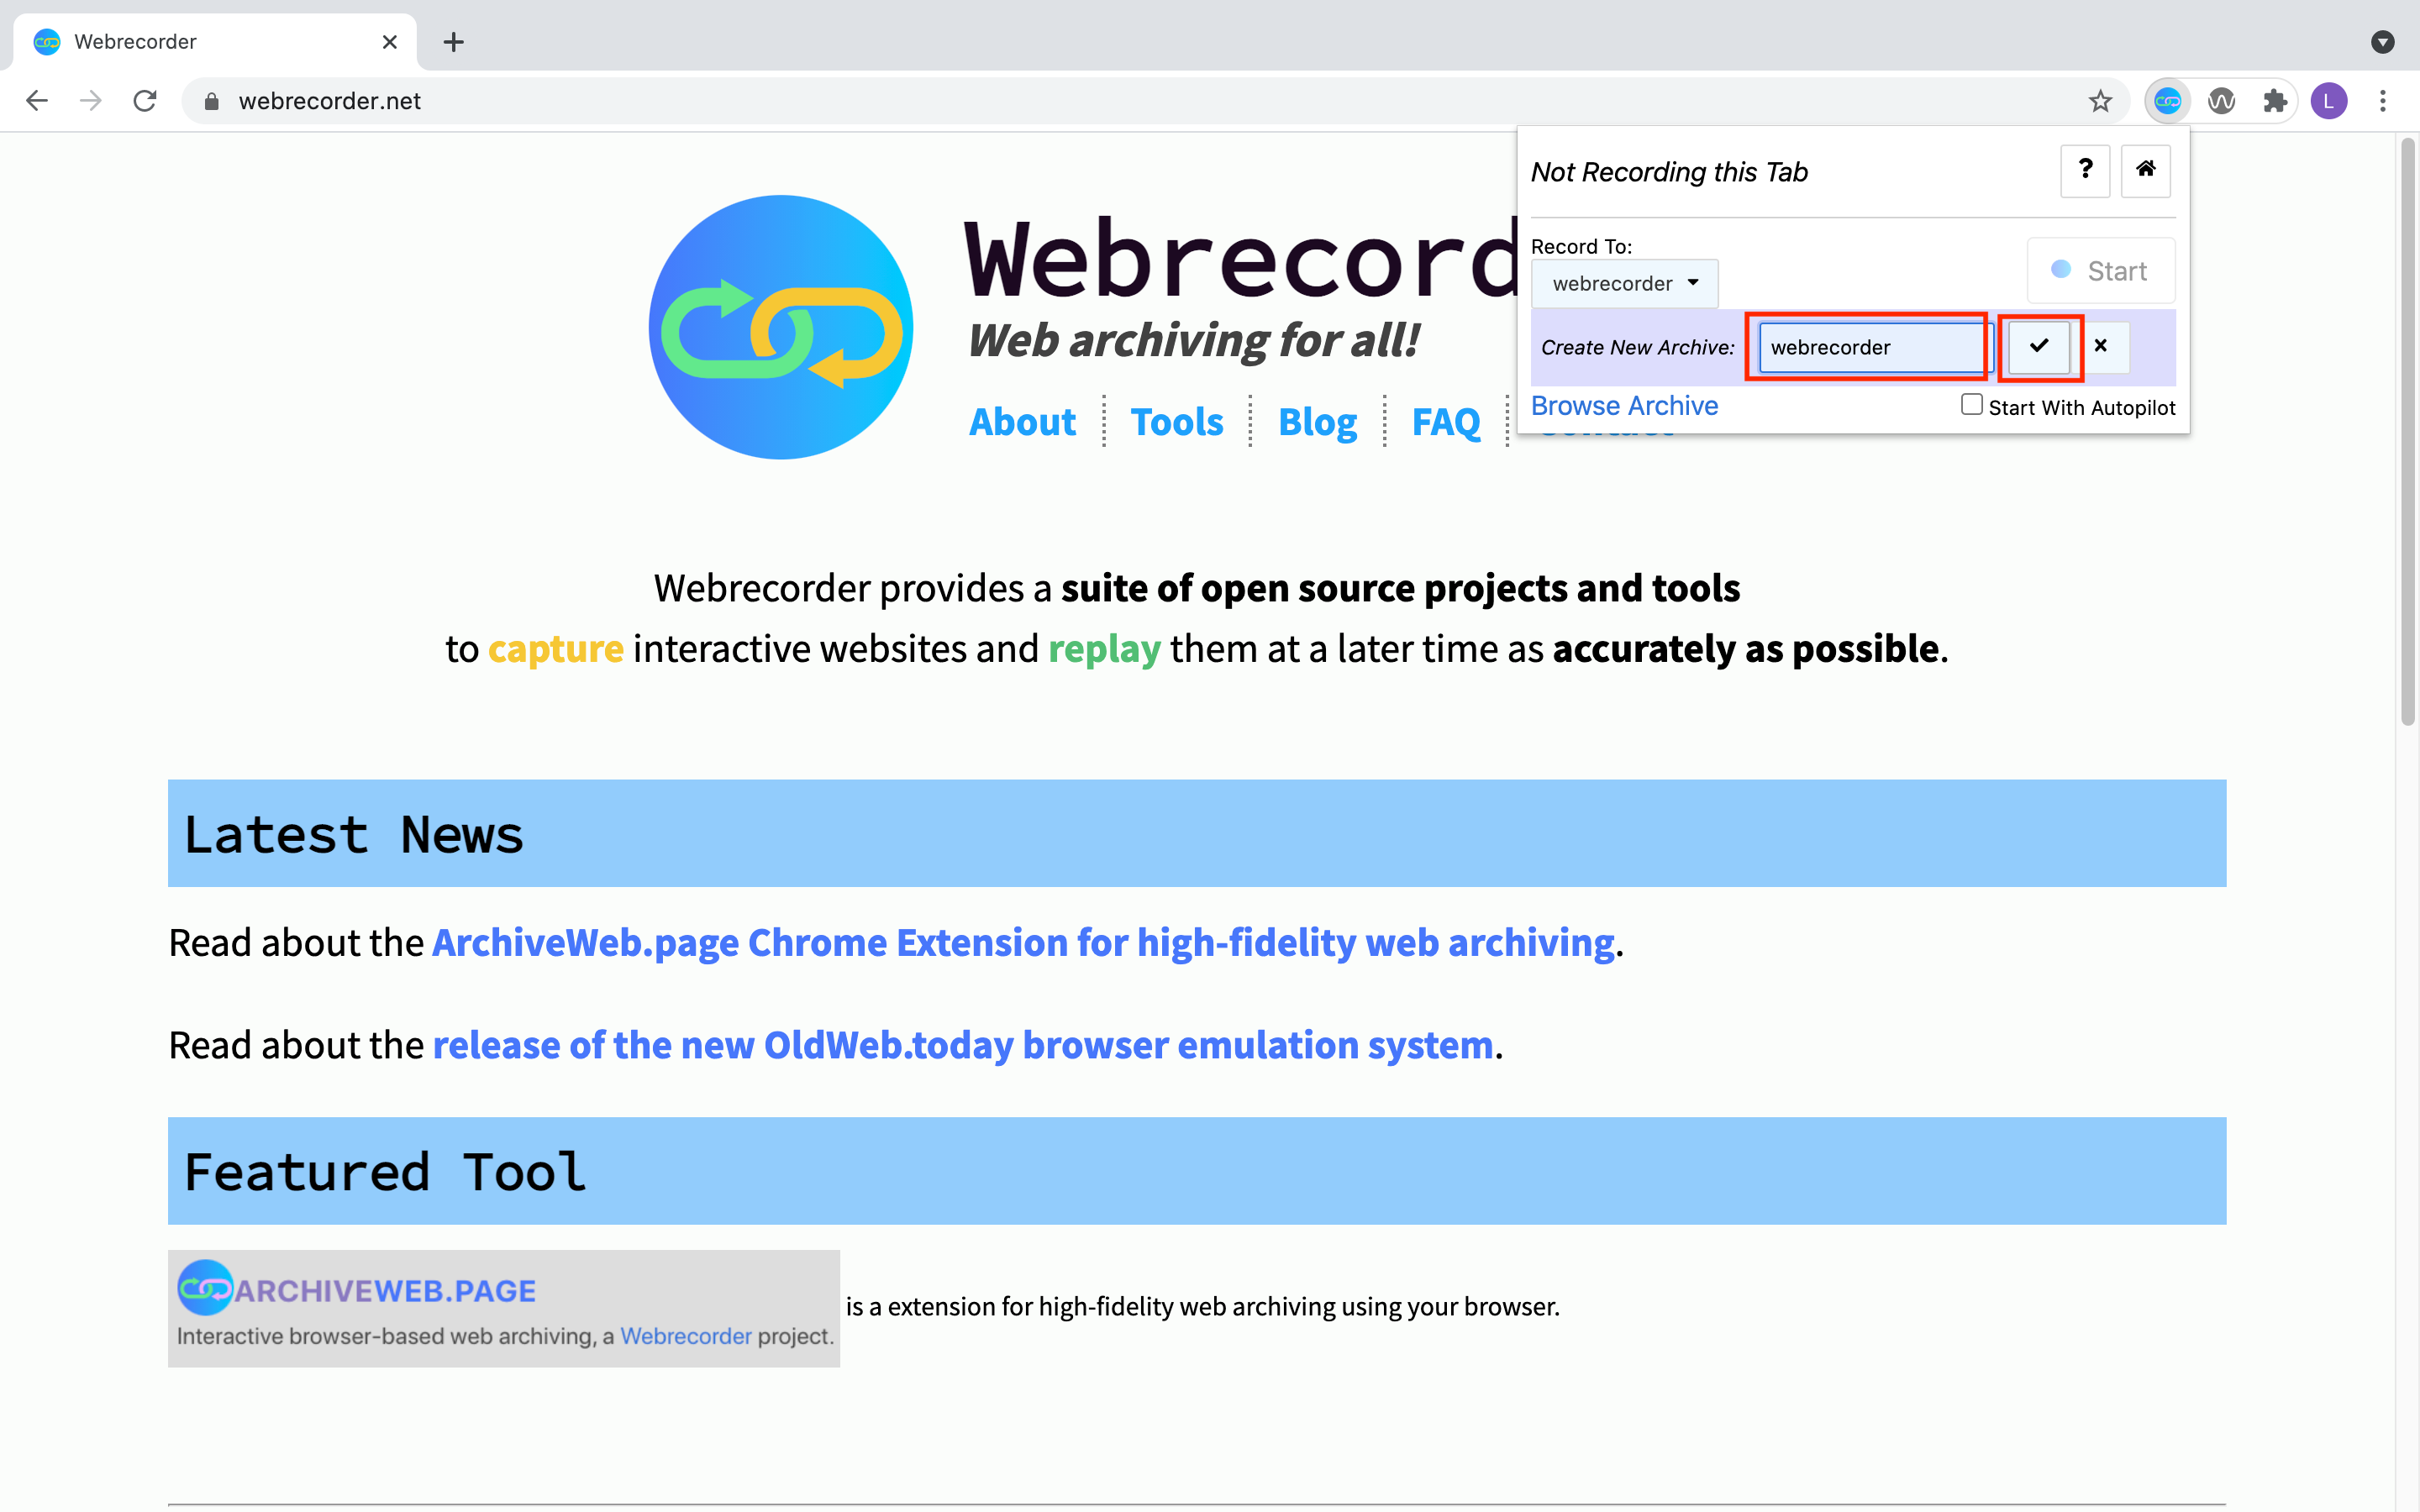 Screenshot of archiveweb.page's extension with the interface